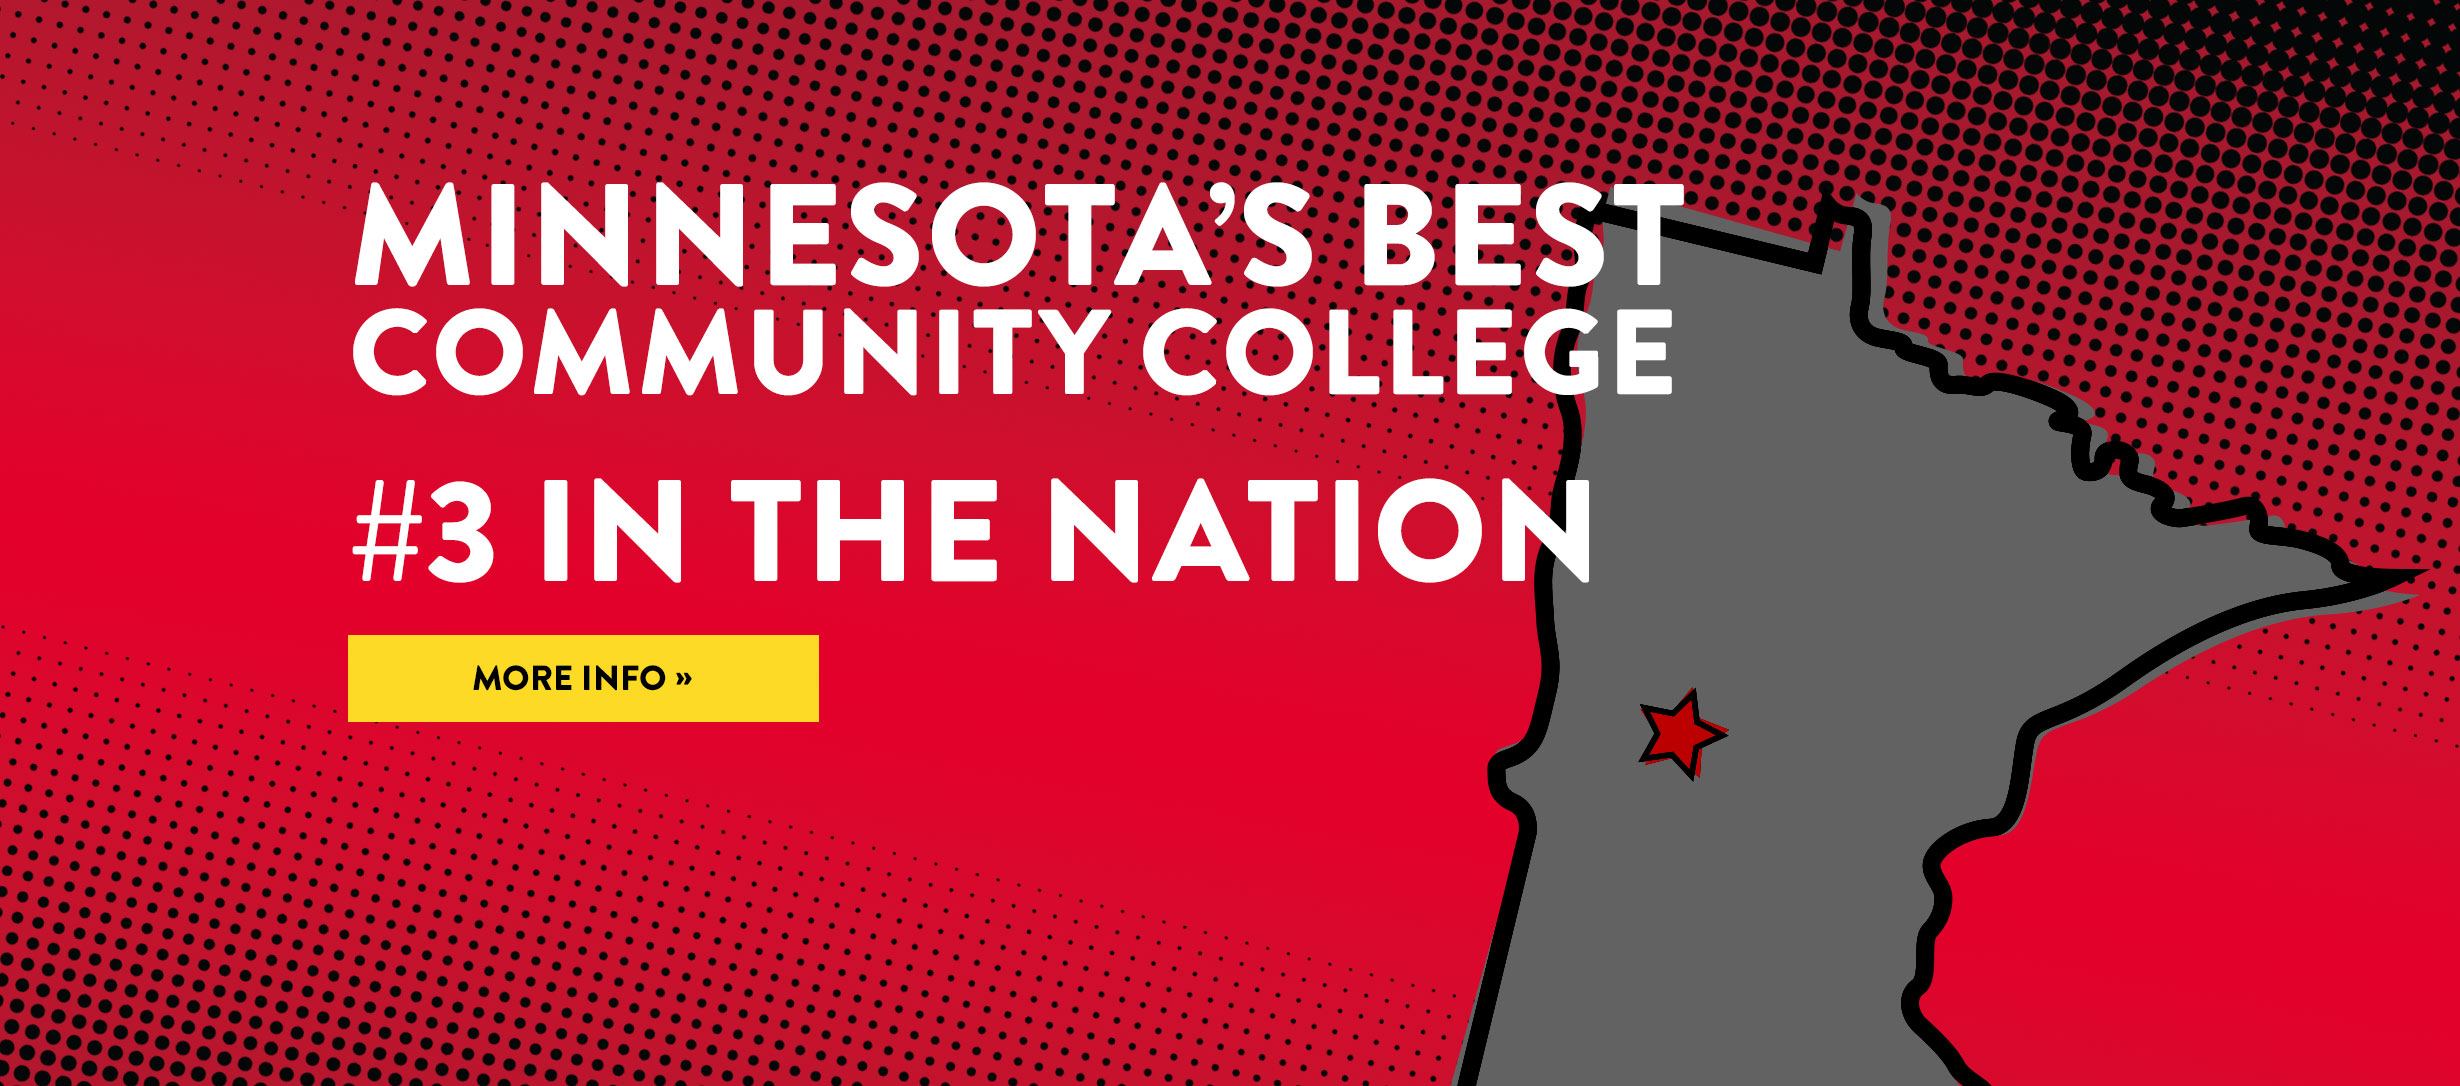 Minnesota's Best College and Number 3 in the Nation